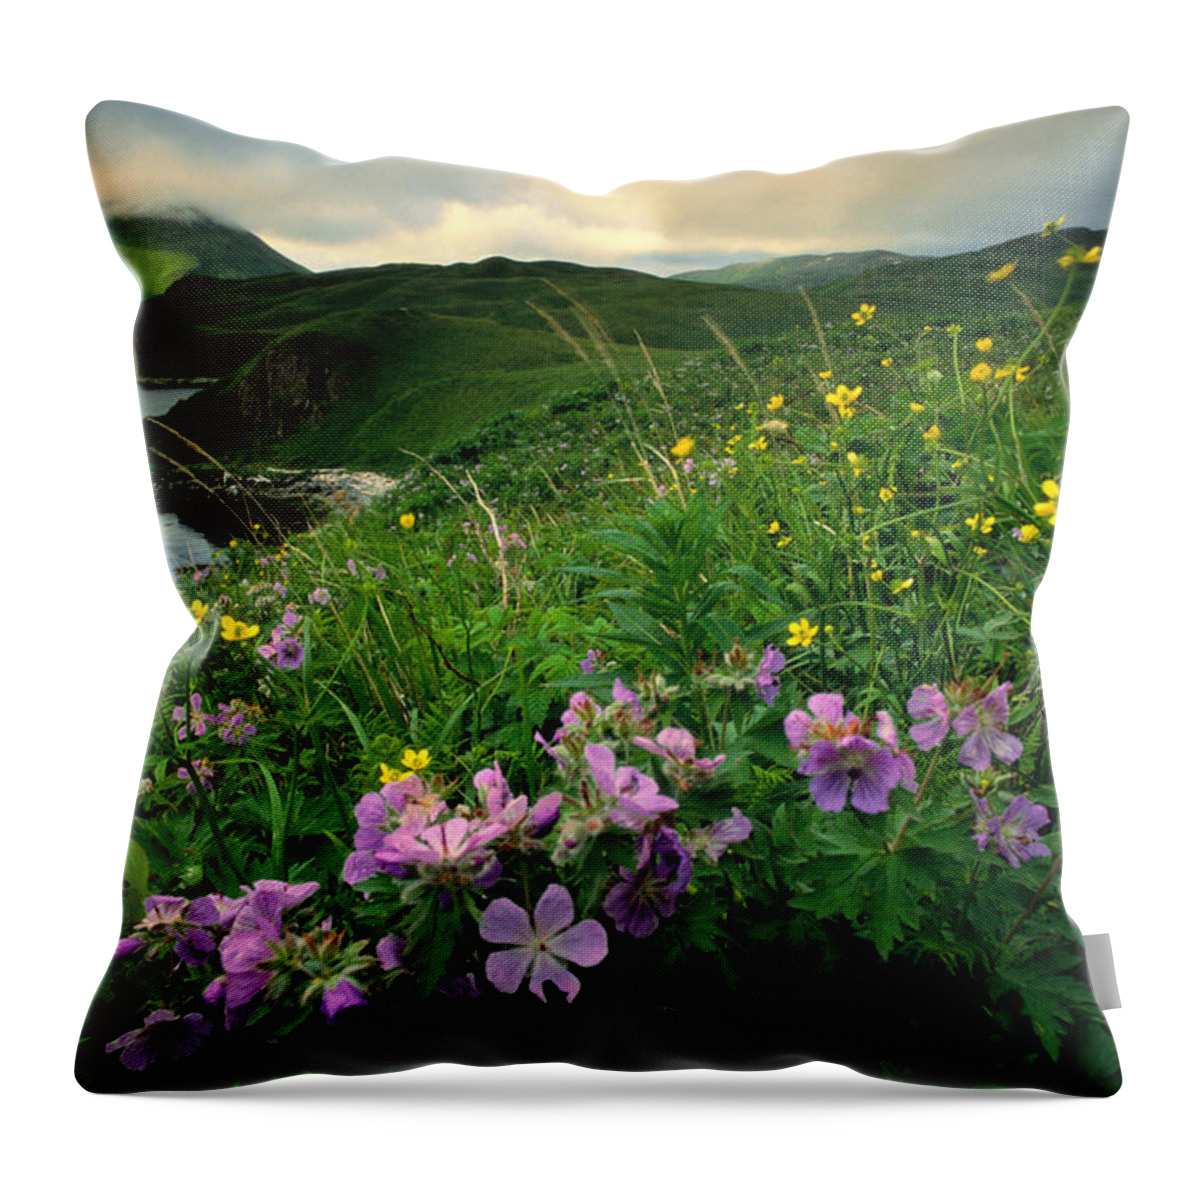 Scenics Throw Pillow featuring the photograph Coastal Paintbrush And Wild Geranium by Art Wolfe